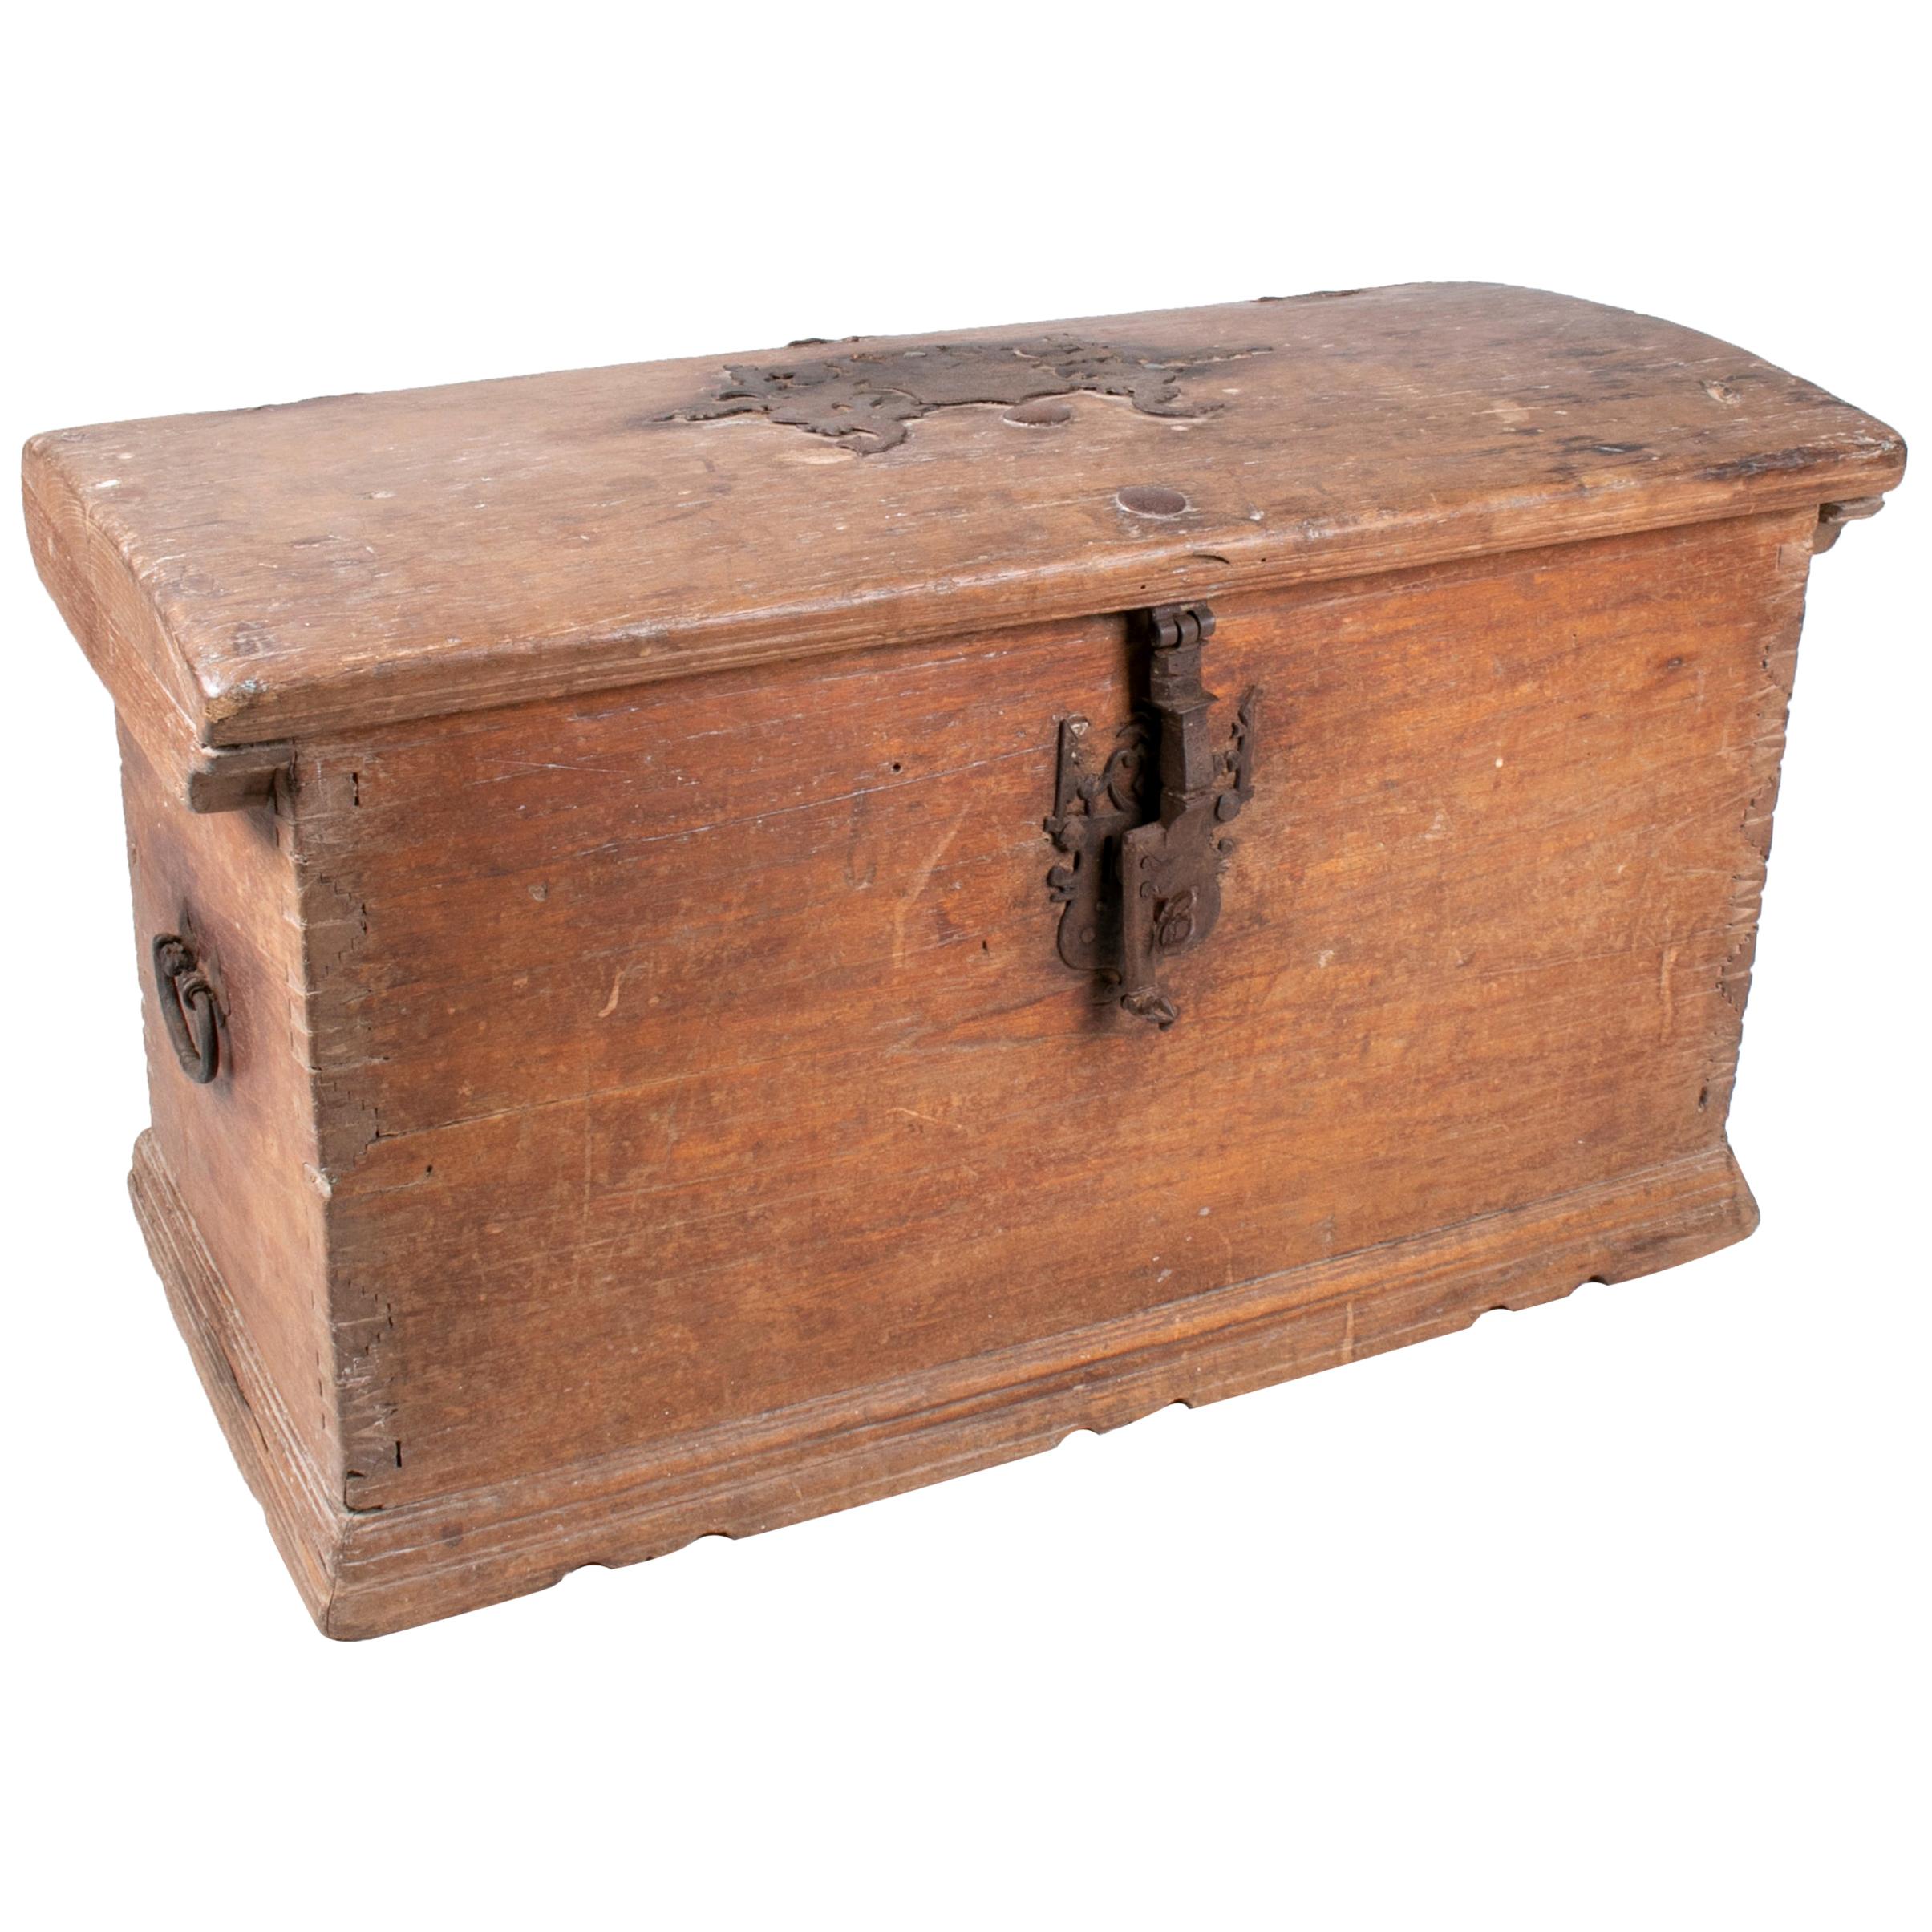 18th Century Spanish Pine Wood Rustic Trunk with Wrought Iron Fittings For Sale